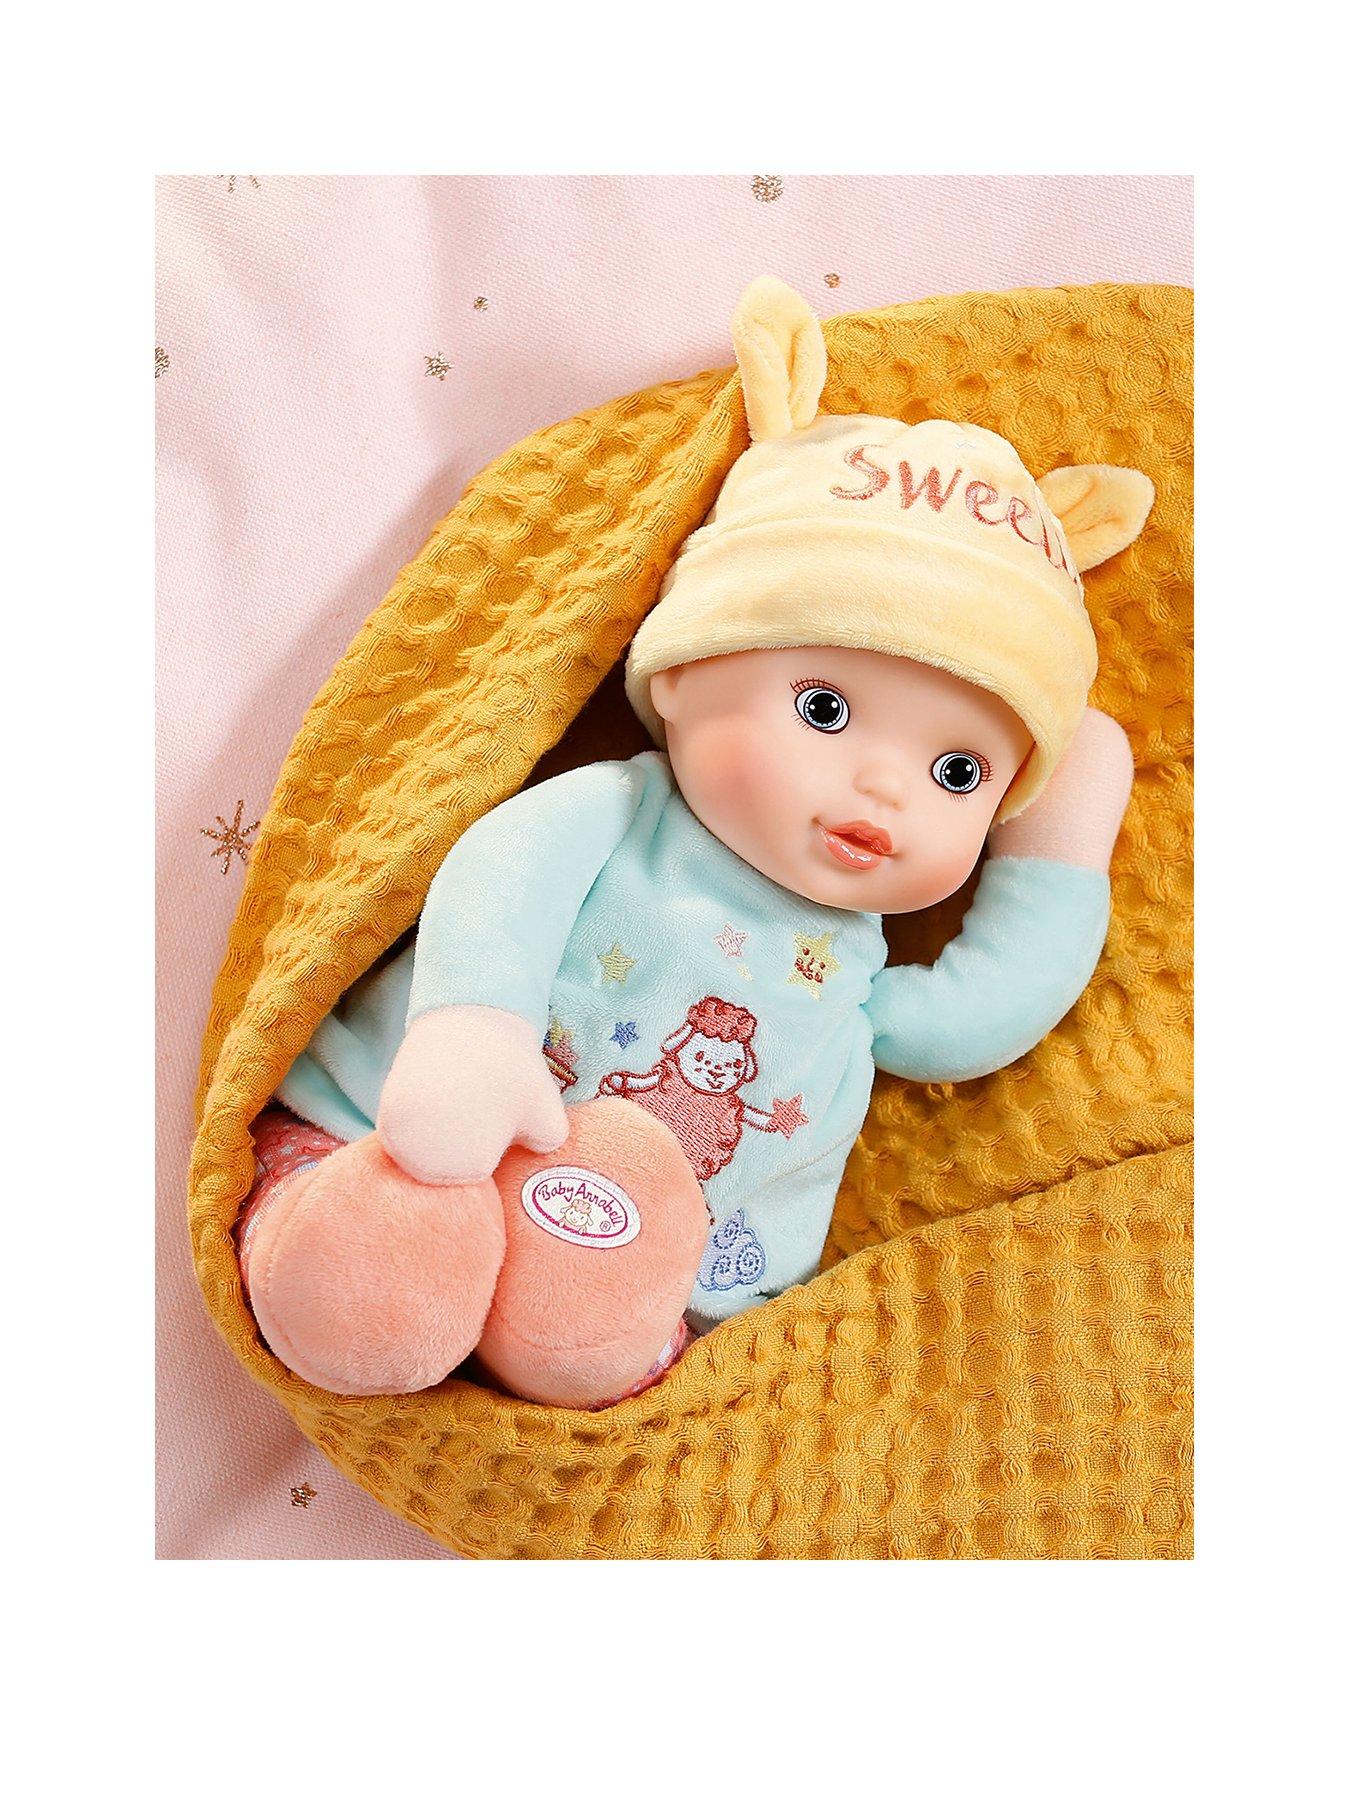 baby annabell heartbeat doll